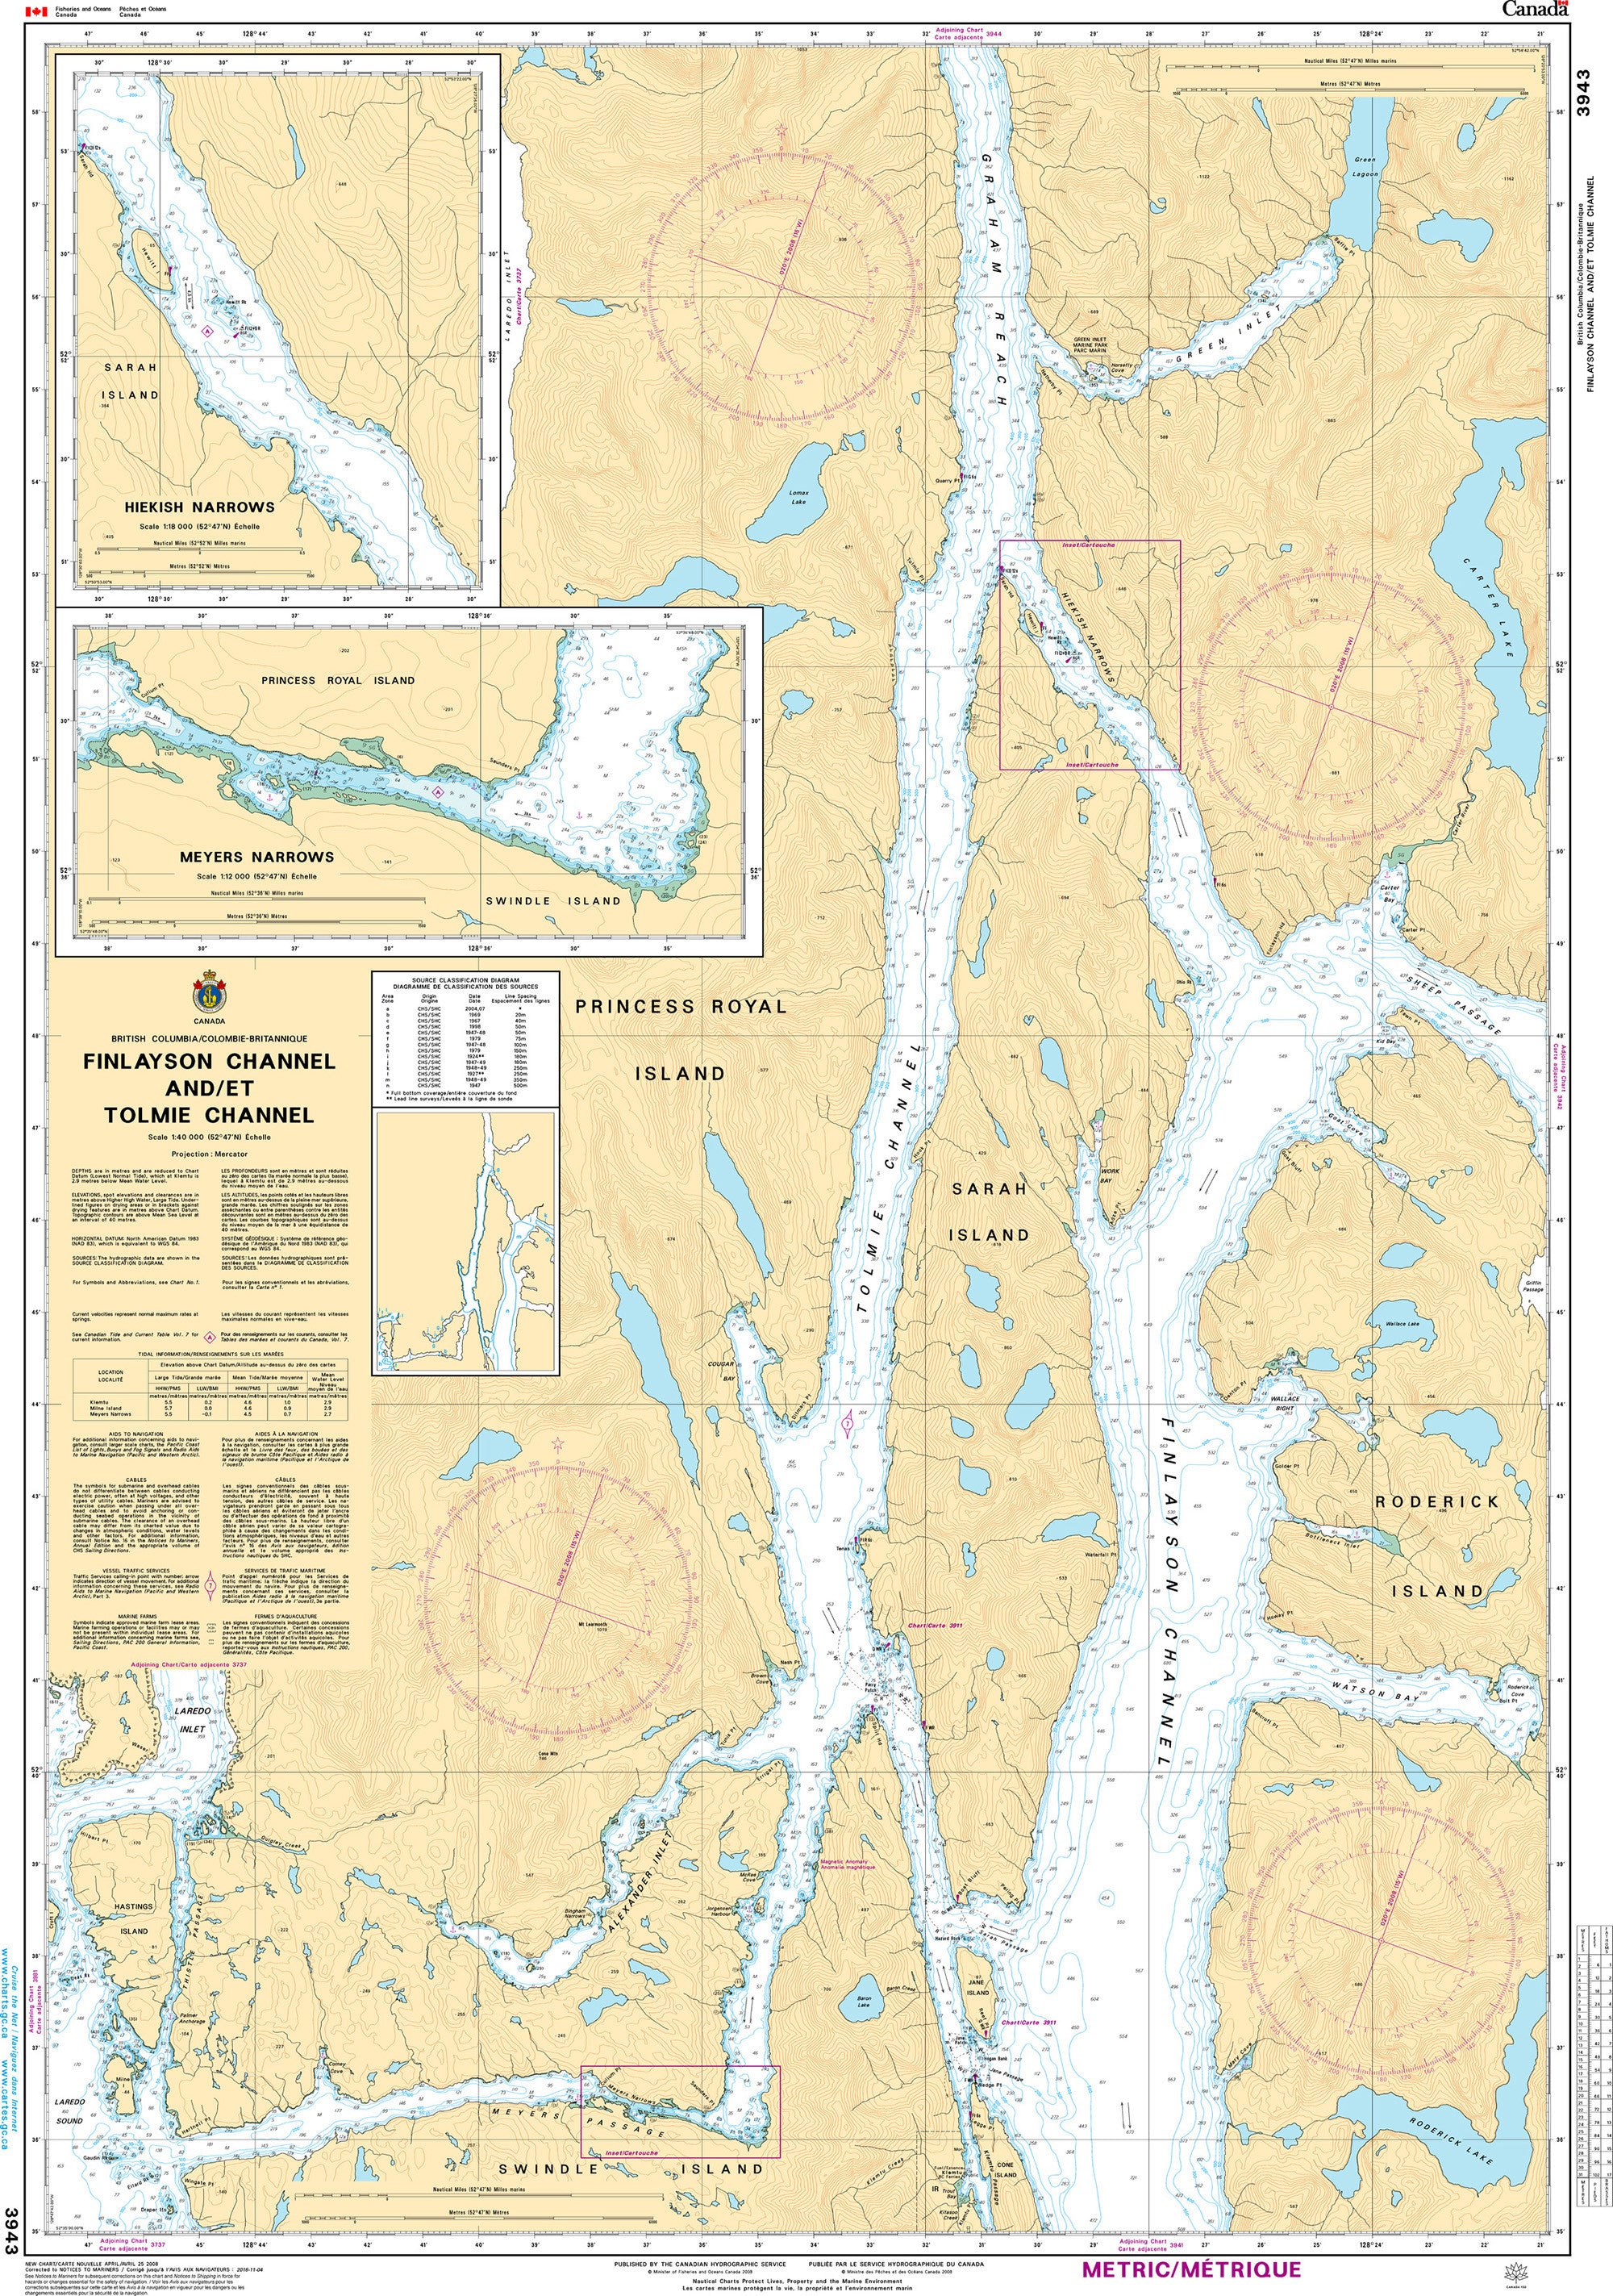 Canadian Hydrographic Service Nautical Chart CHS3943: Finlayson Channel and/et Tolmie Channel